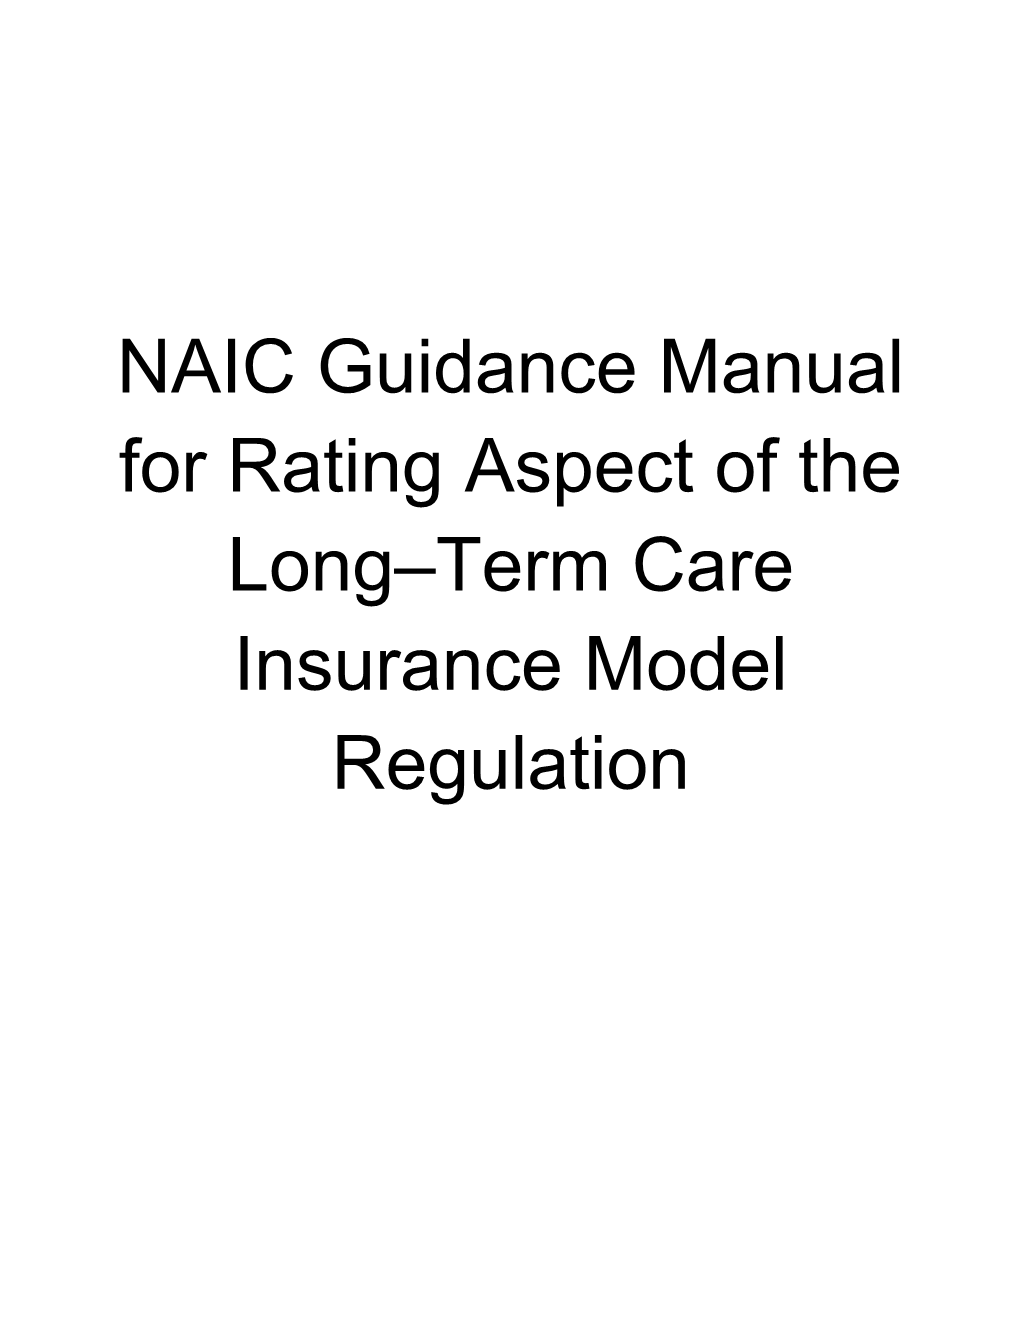 NAIC Guidance Manual for Rating Aspects of the Long-Term Care